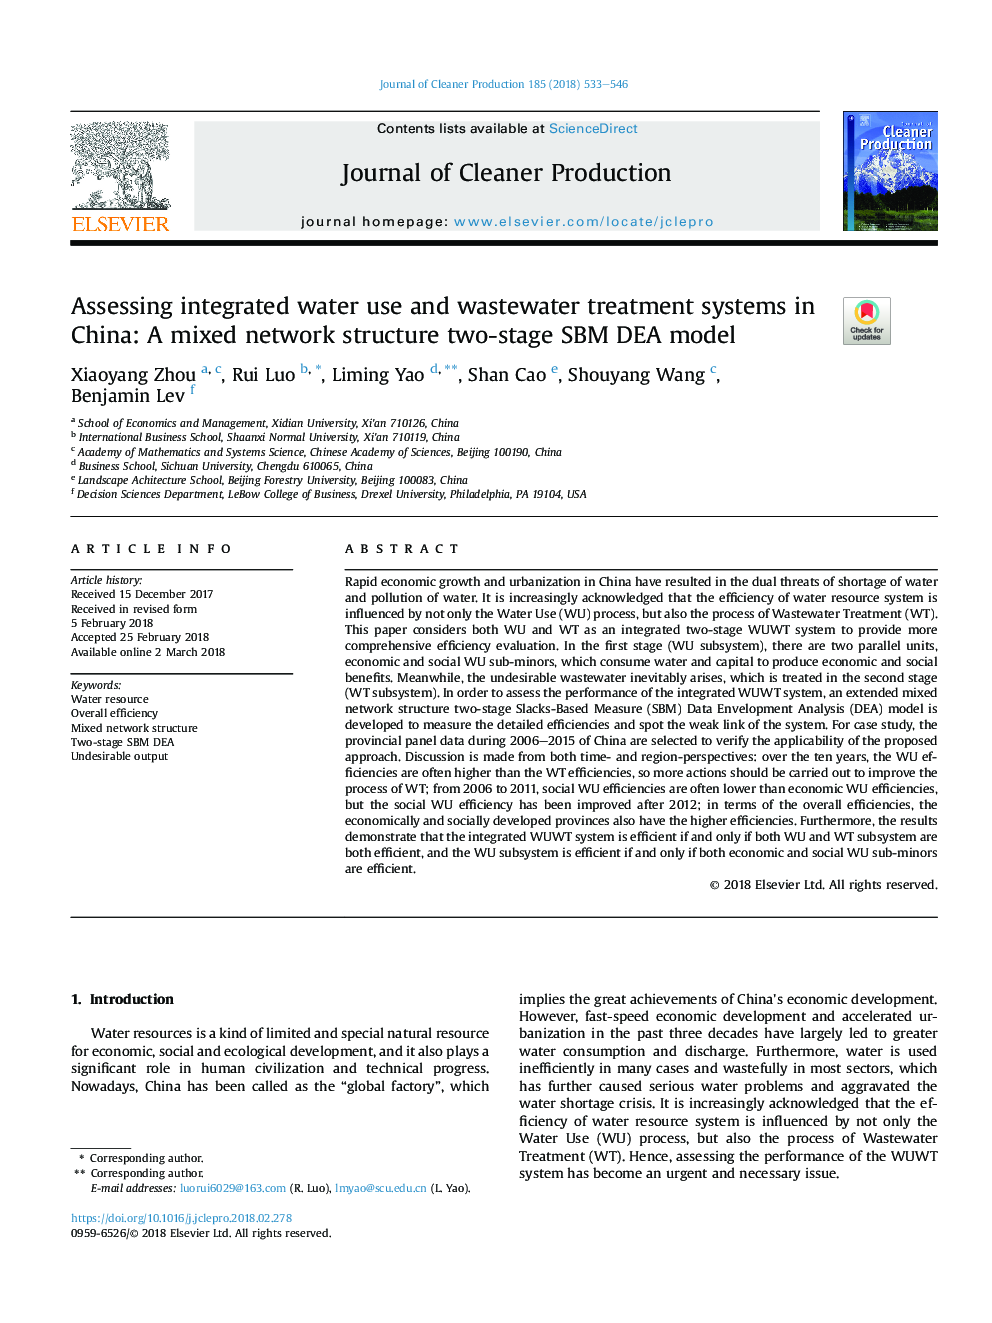 Assessing integrated water use and wastewater treatment systems in China: A mixed network structure two-stage SBM DEA model